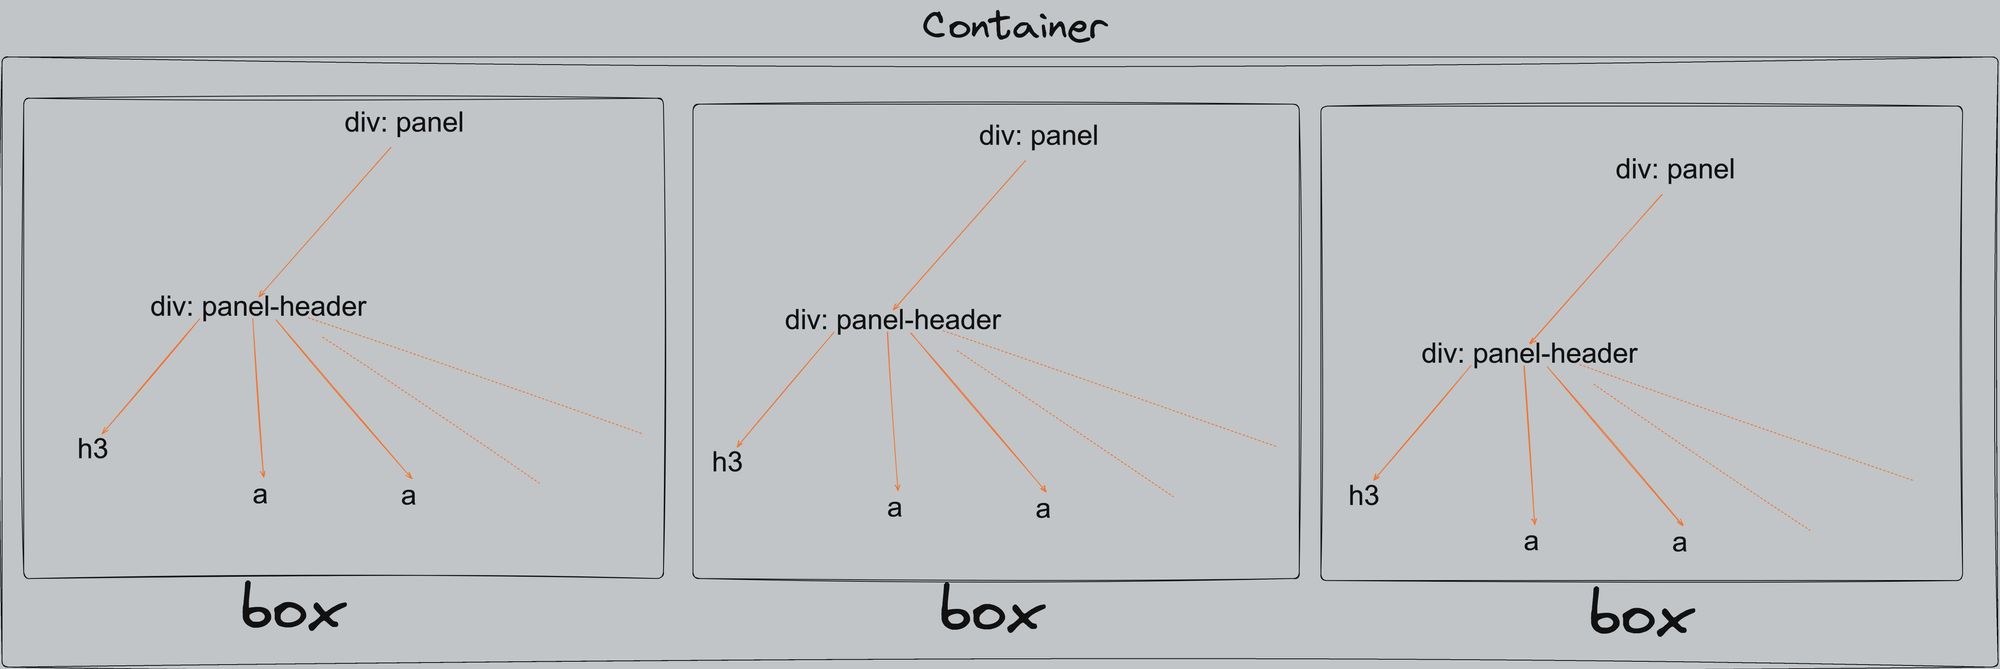 How to parse HTML in Python. Container.